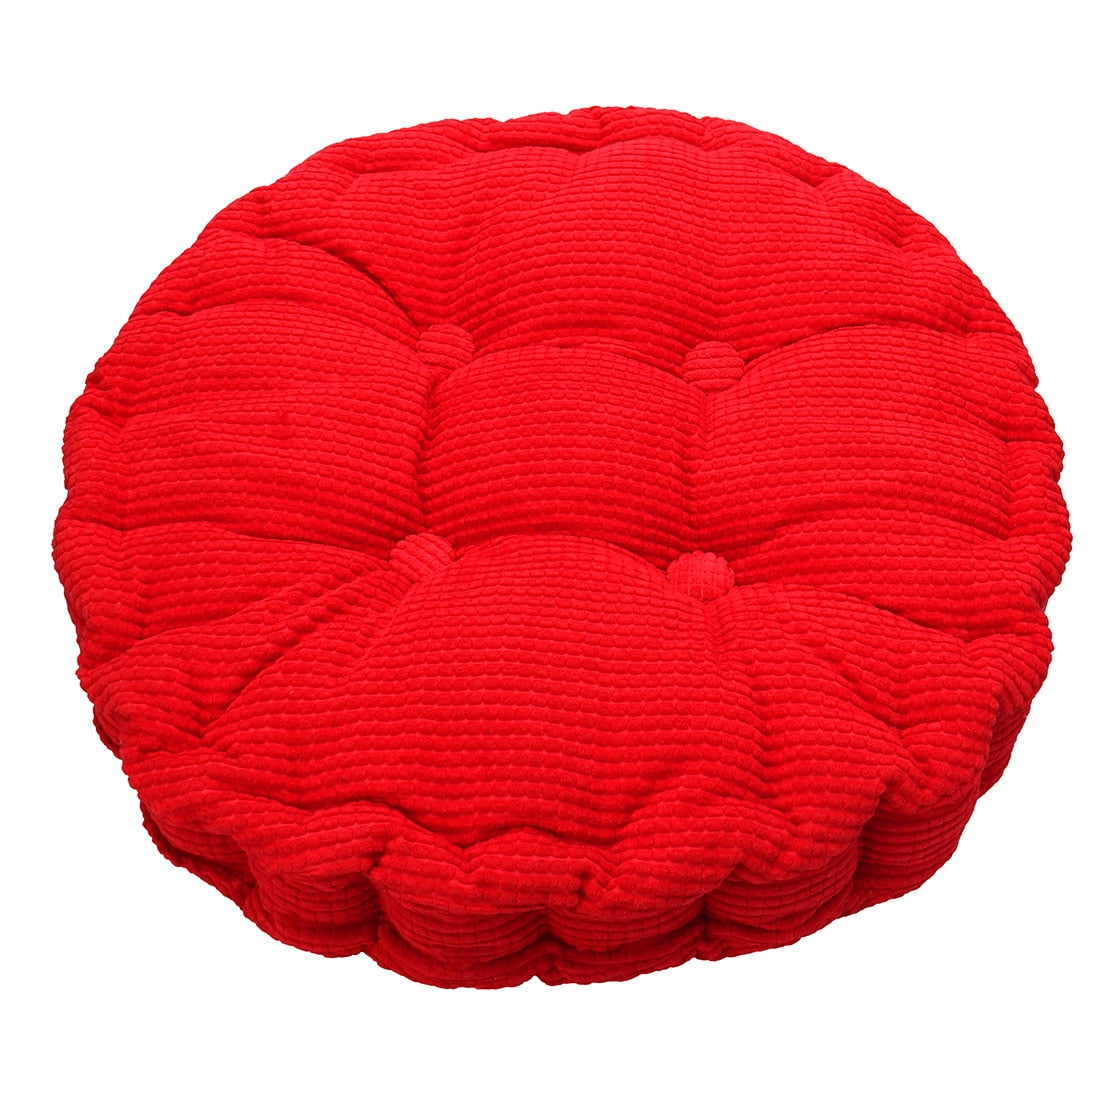 Details about   Fashion Seat Pad Chair Cushion Buttocks Pads Indoor Outdoor Garden Patio Decor 